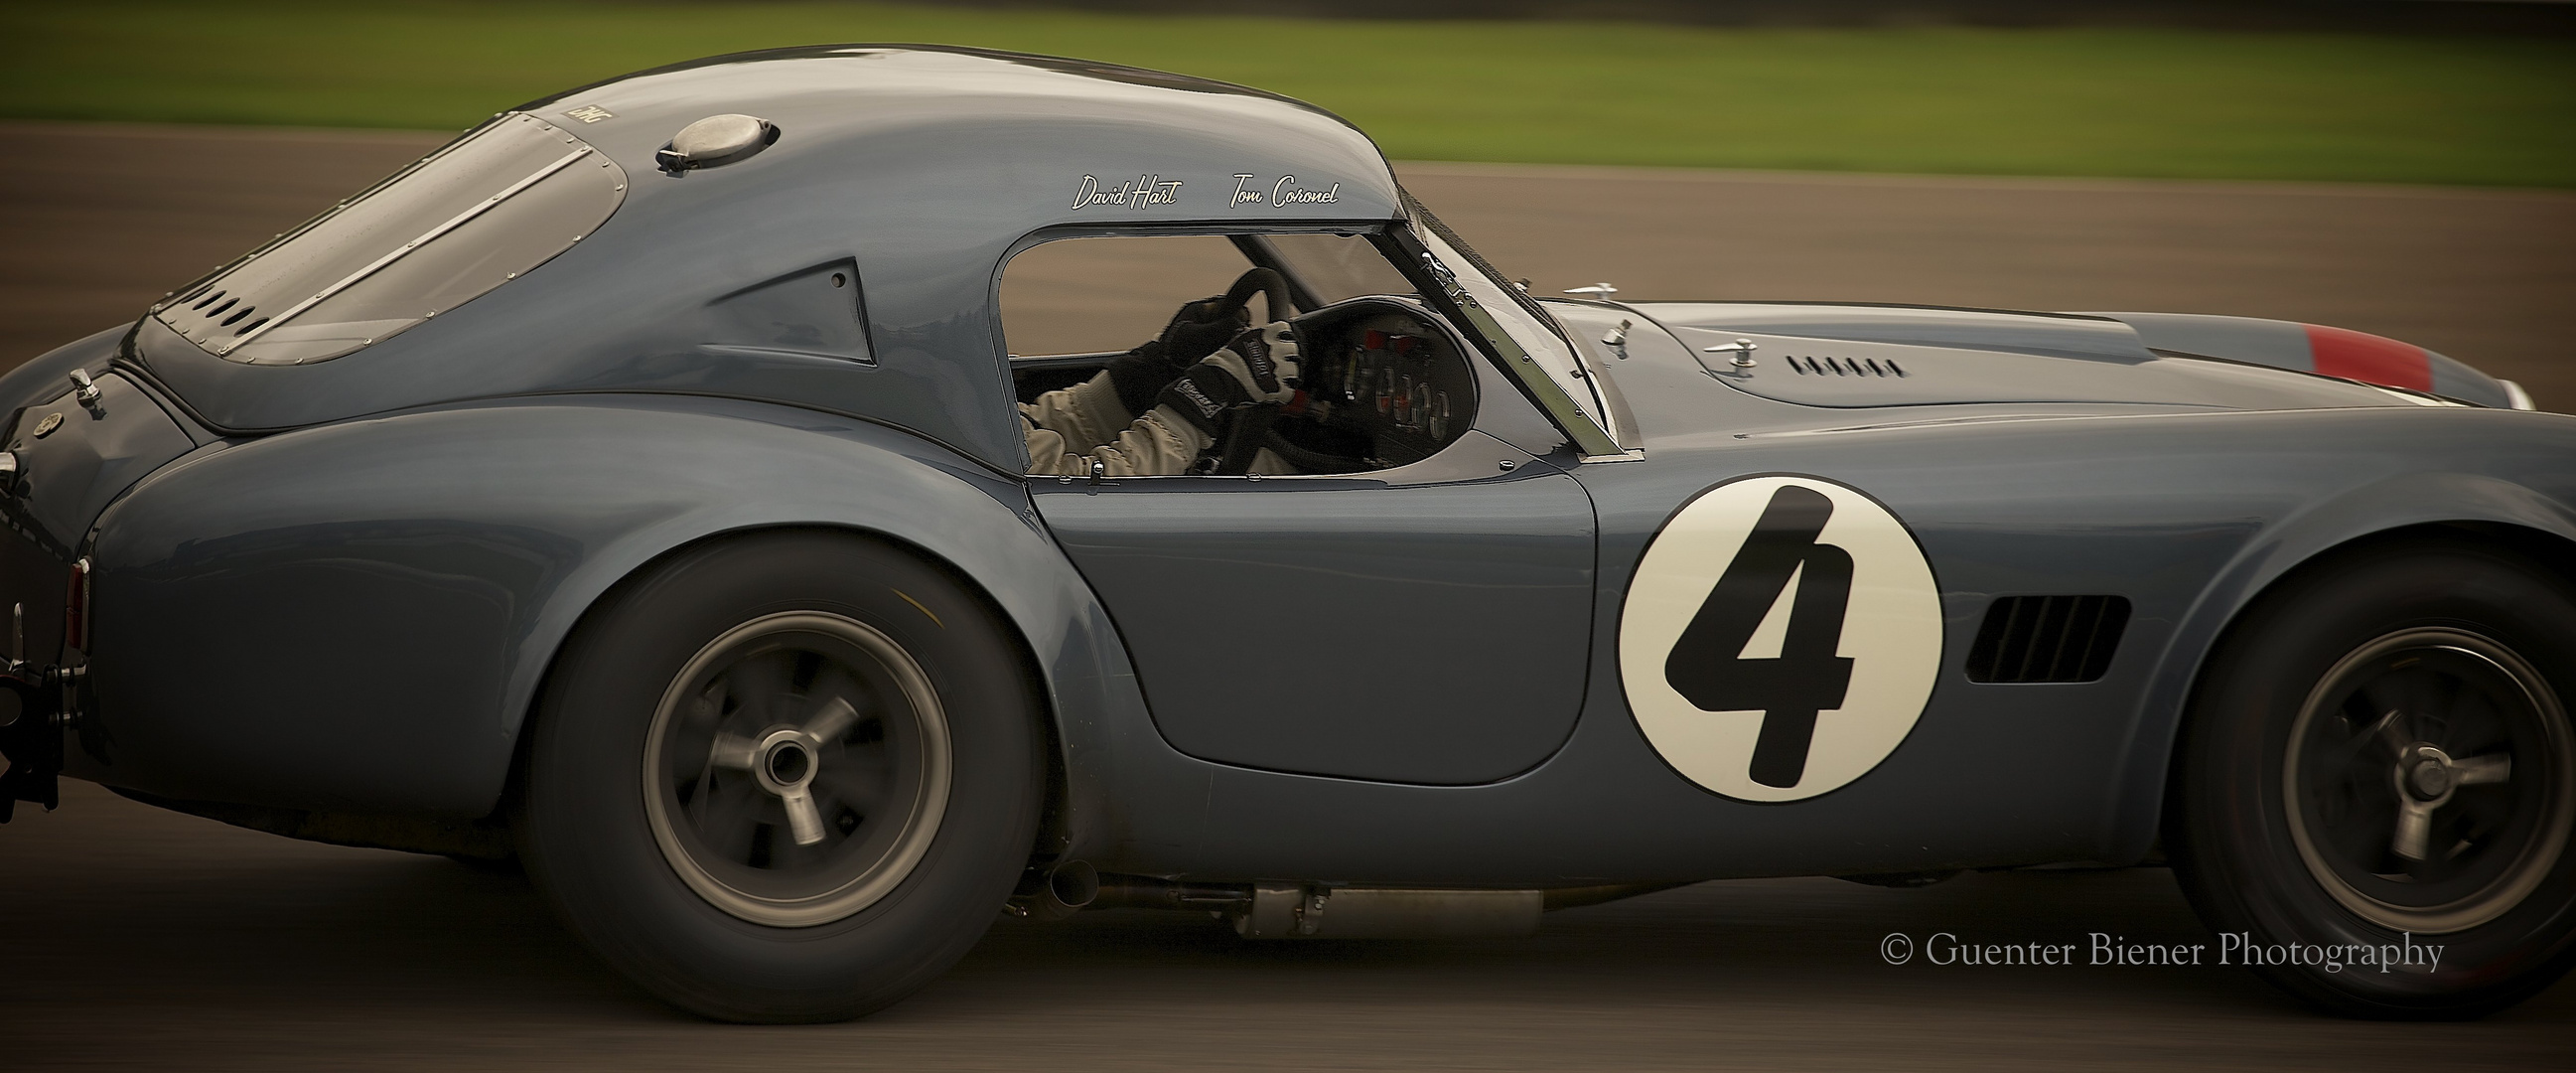 "Special for Hot Chill" : Cobra racing....